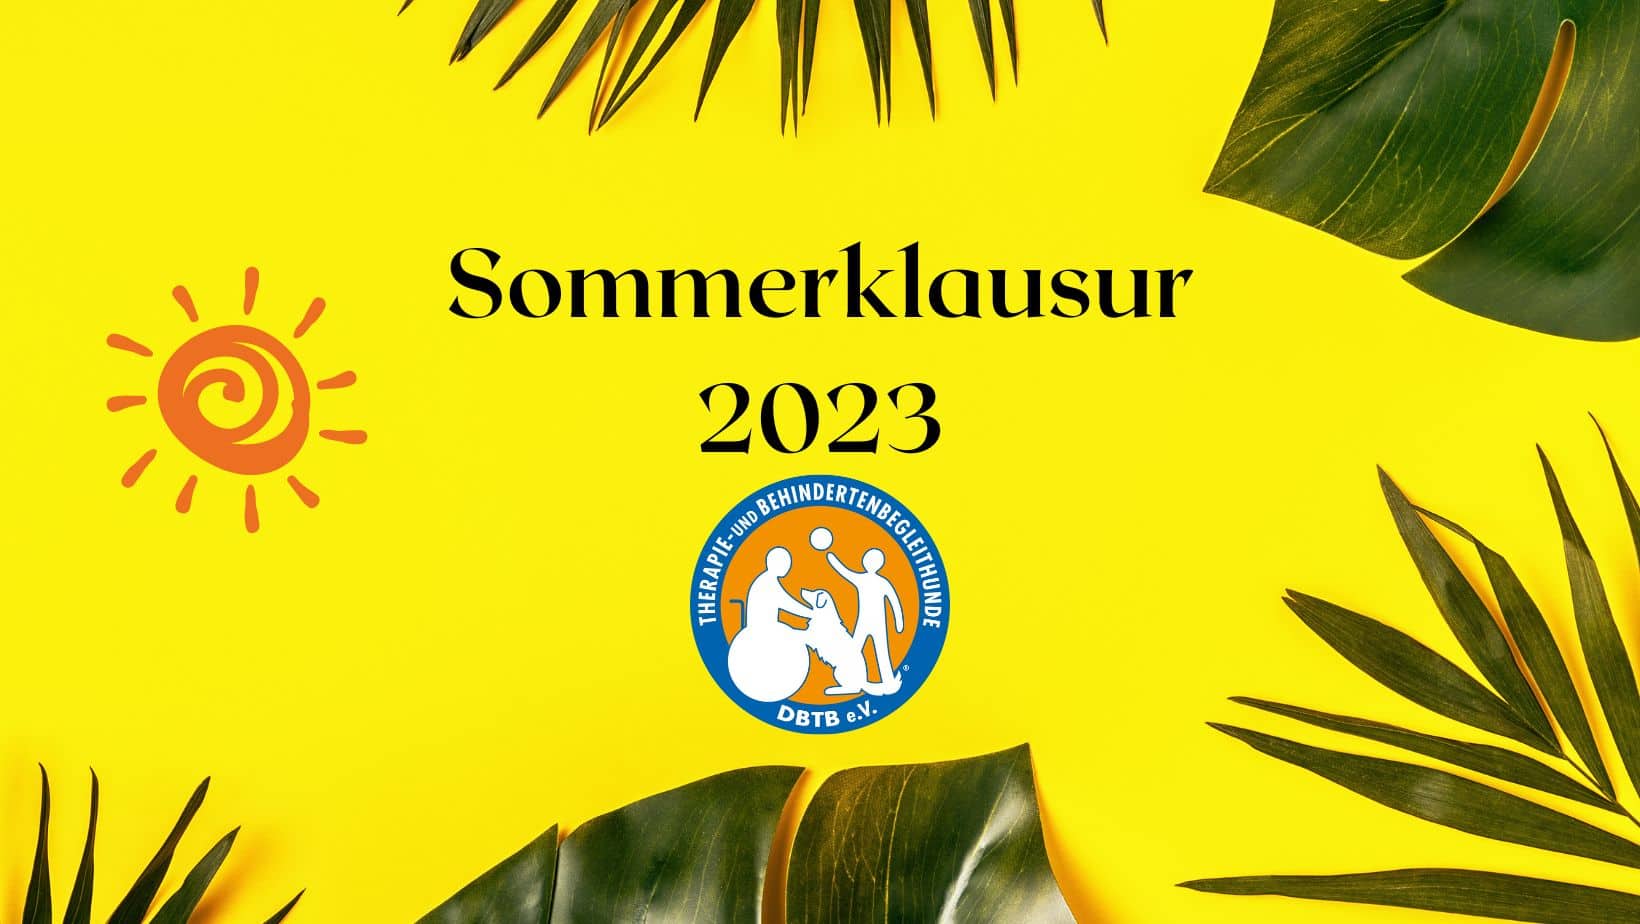 Featured image for “Sommerklausur 2023”